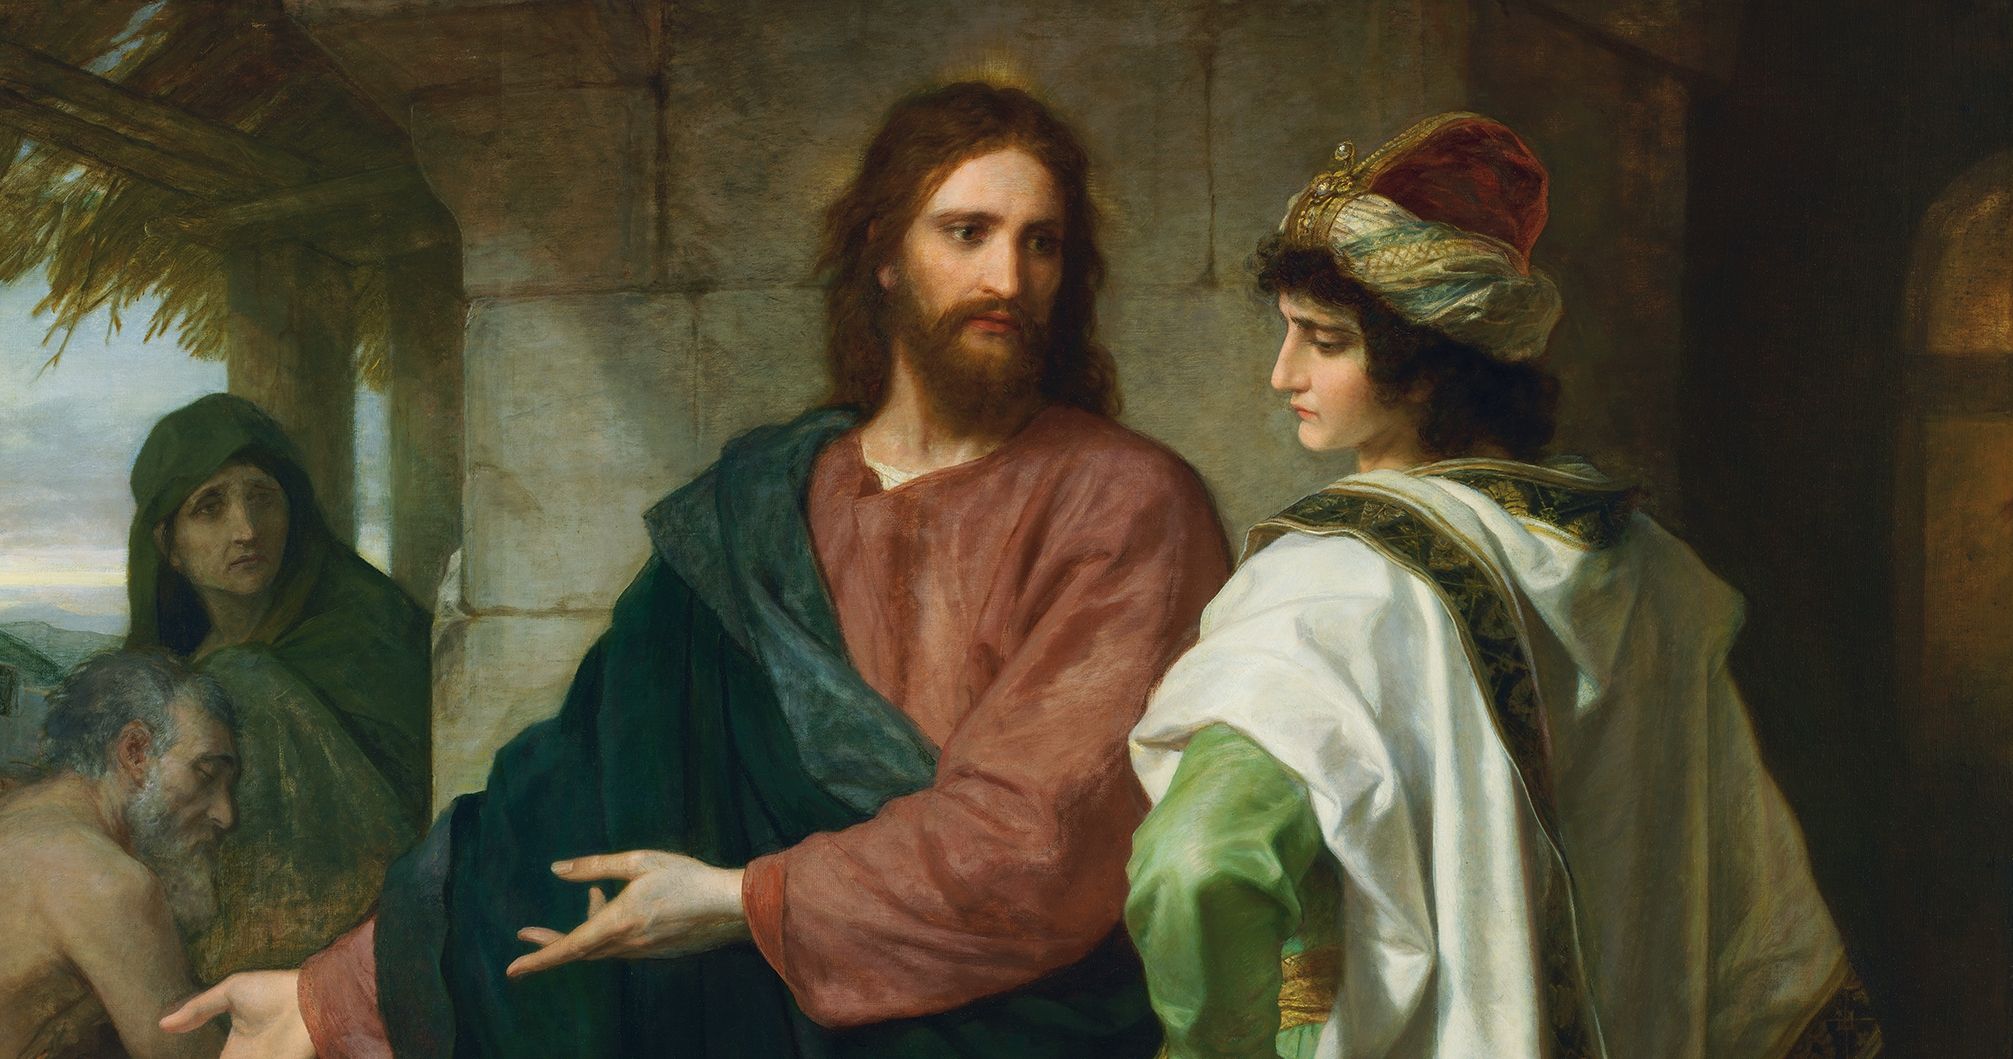 Christ and the Rich Young Ruler, by Heinrich Hofmann. Image via Church of Jesus Christ.